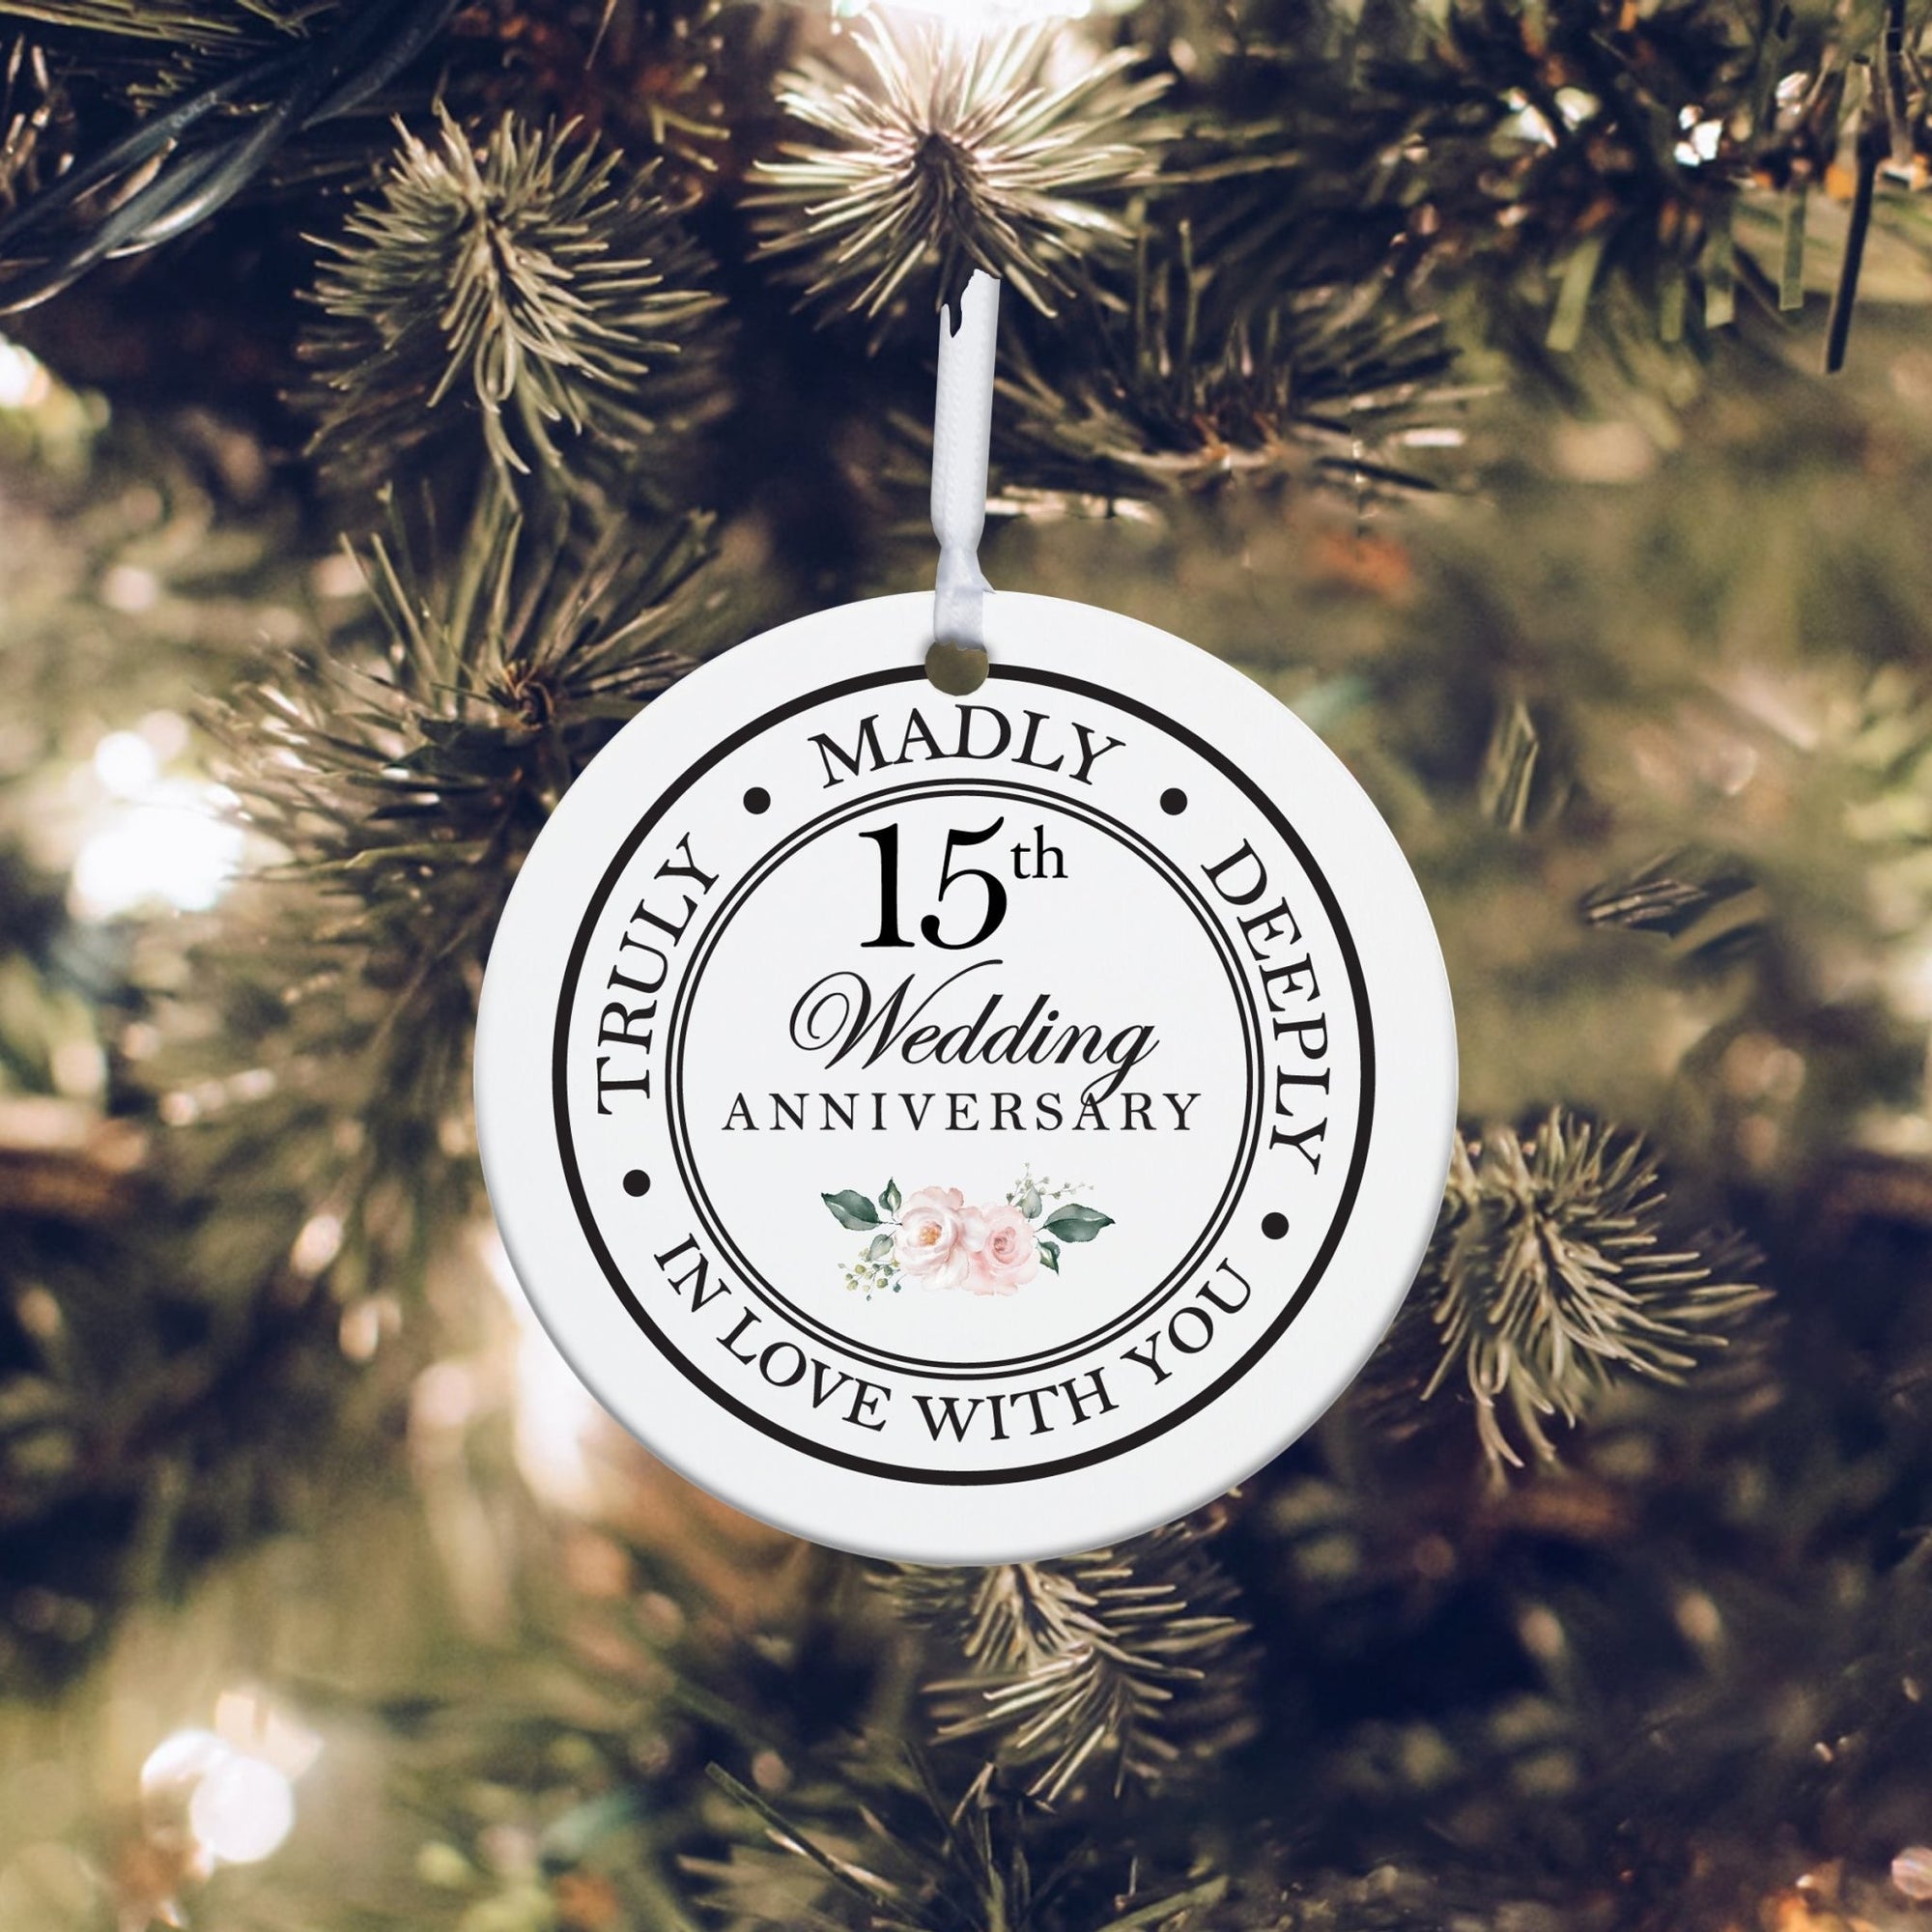 15th Wedding Anniversary White Ornament With Inspirational Message Gift Ideas - Truly, Madly, Deeply In Love With You - LifeSong Milestones